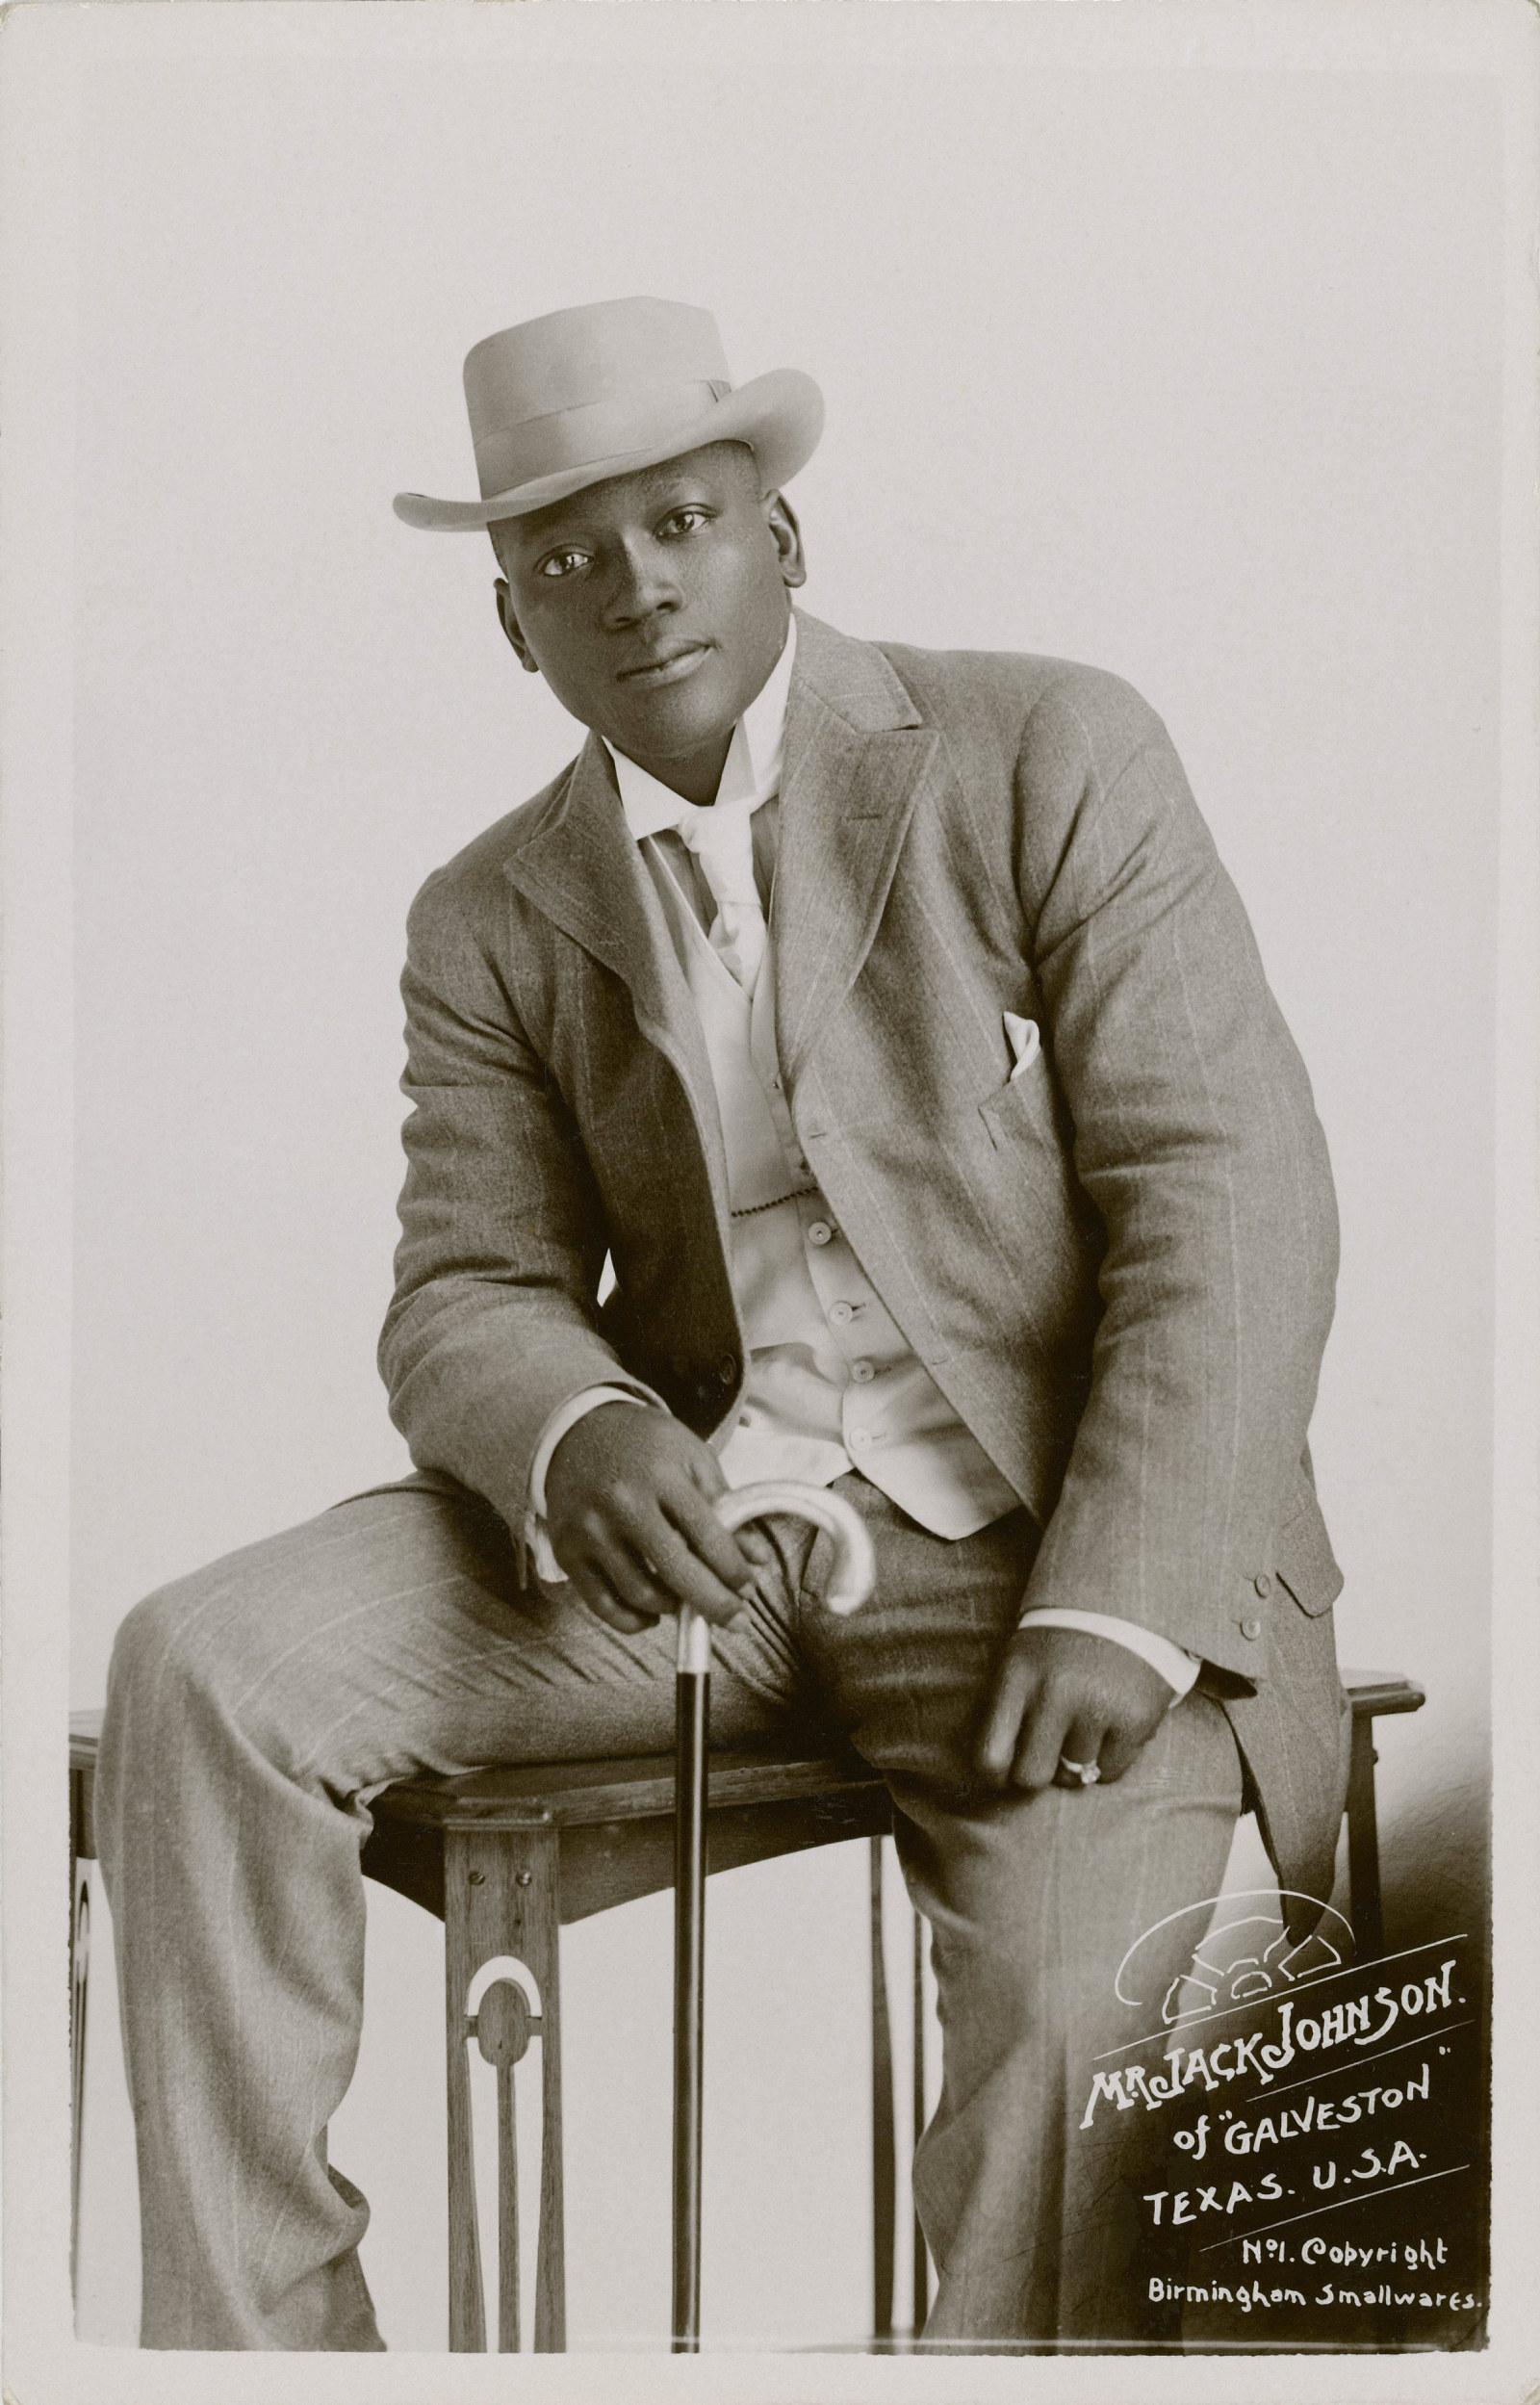 Boxer Johnson sits on a table wearing a brown suit and hat, holding a cane.